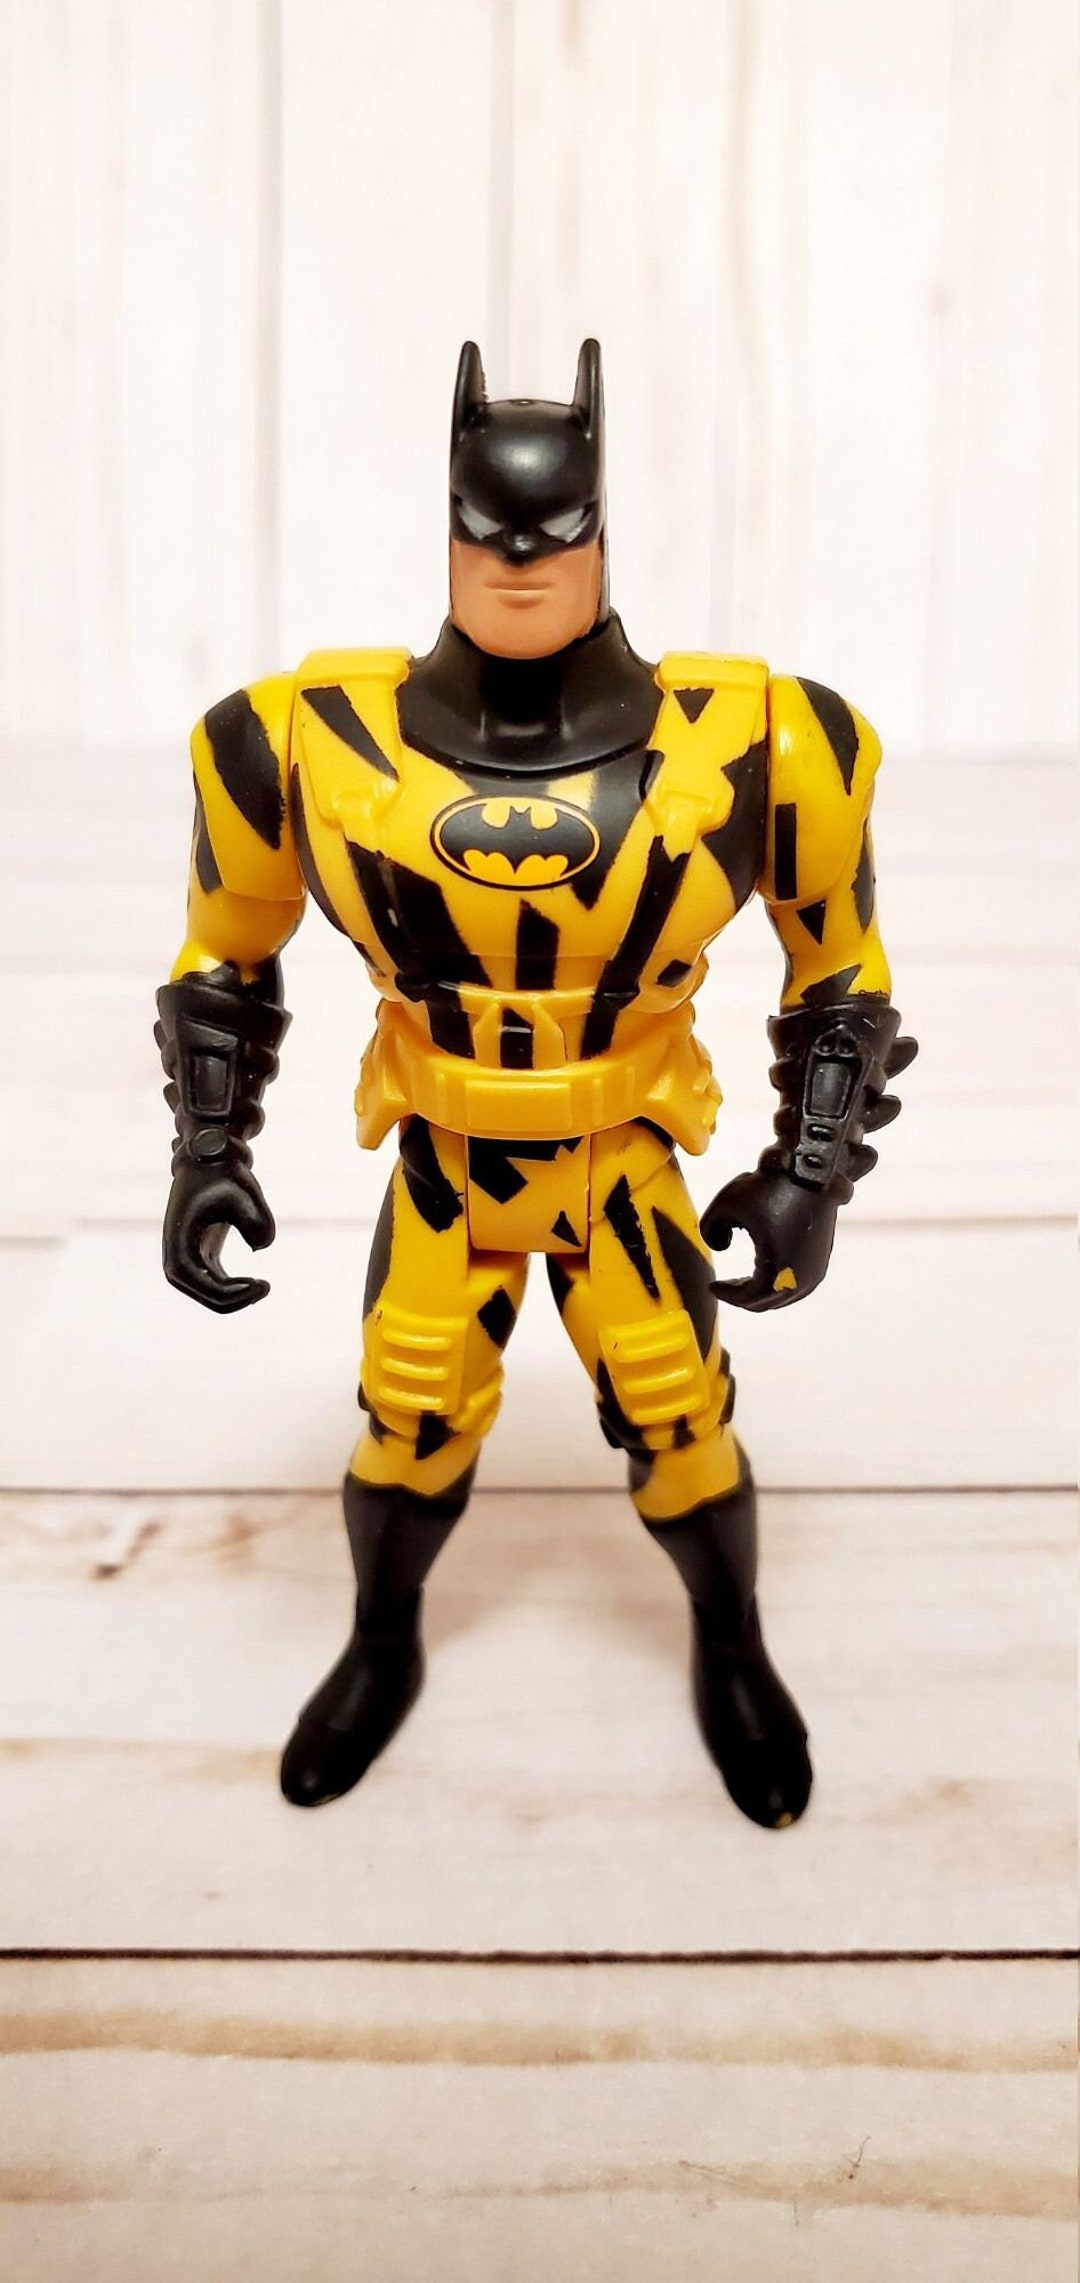 Vintage 1994 Kenner Batman Figure Yellow and Black Outfit - Etsy